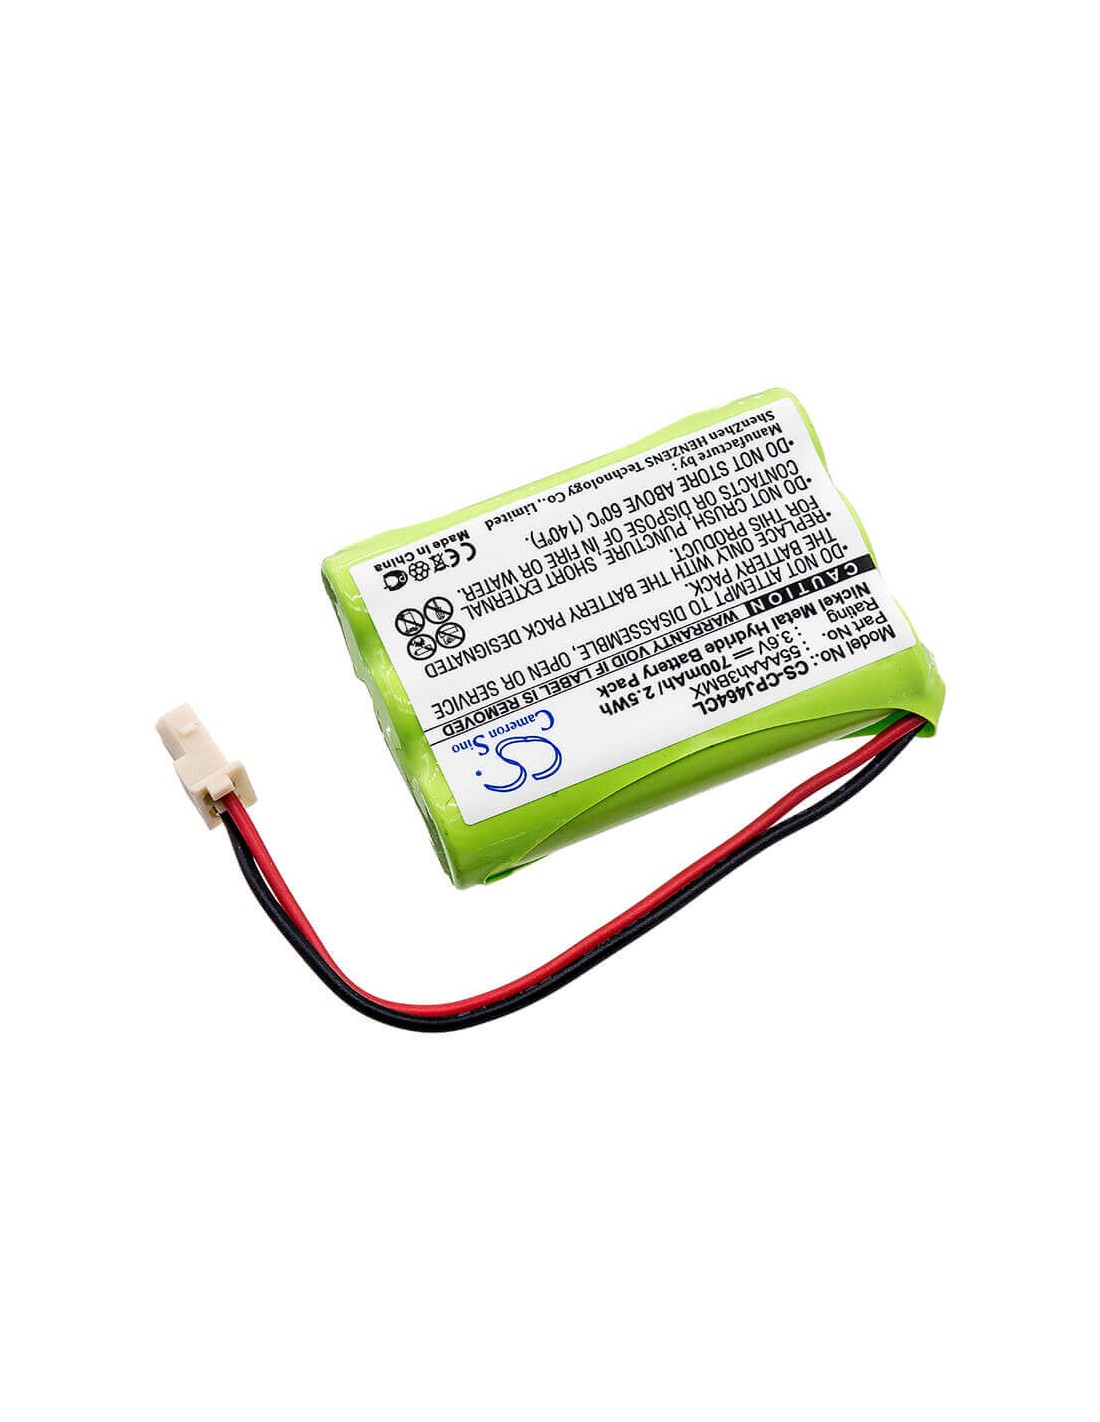 Battery for American, 2141cll 3.6V, 700mAh - 2.52Wh